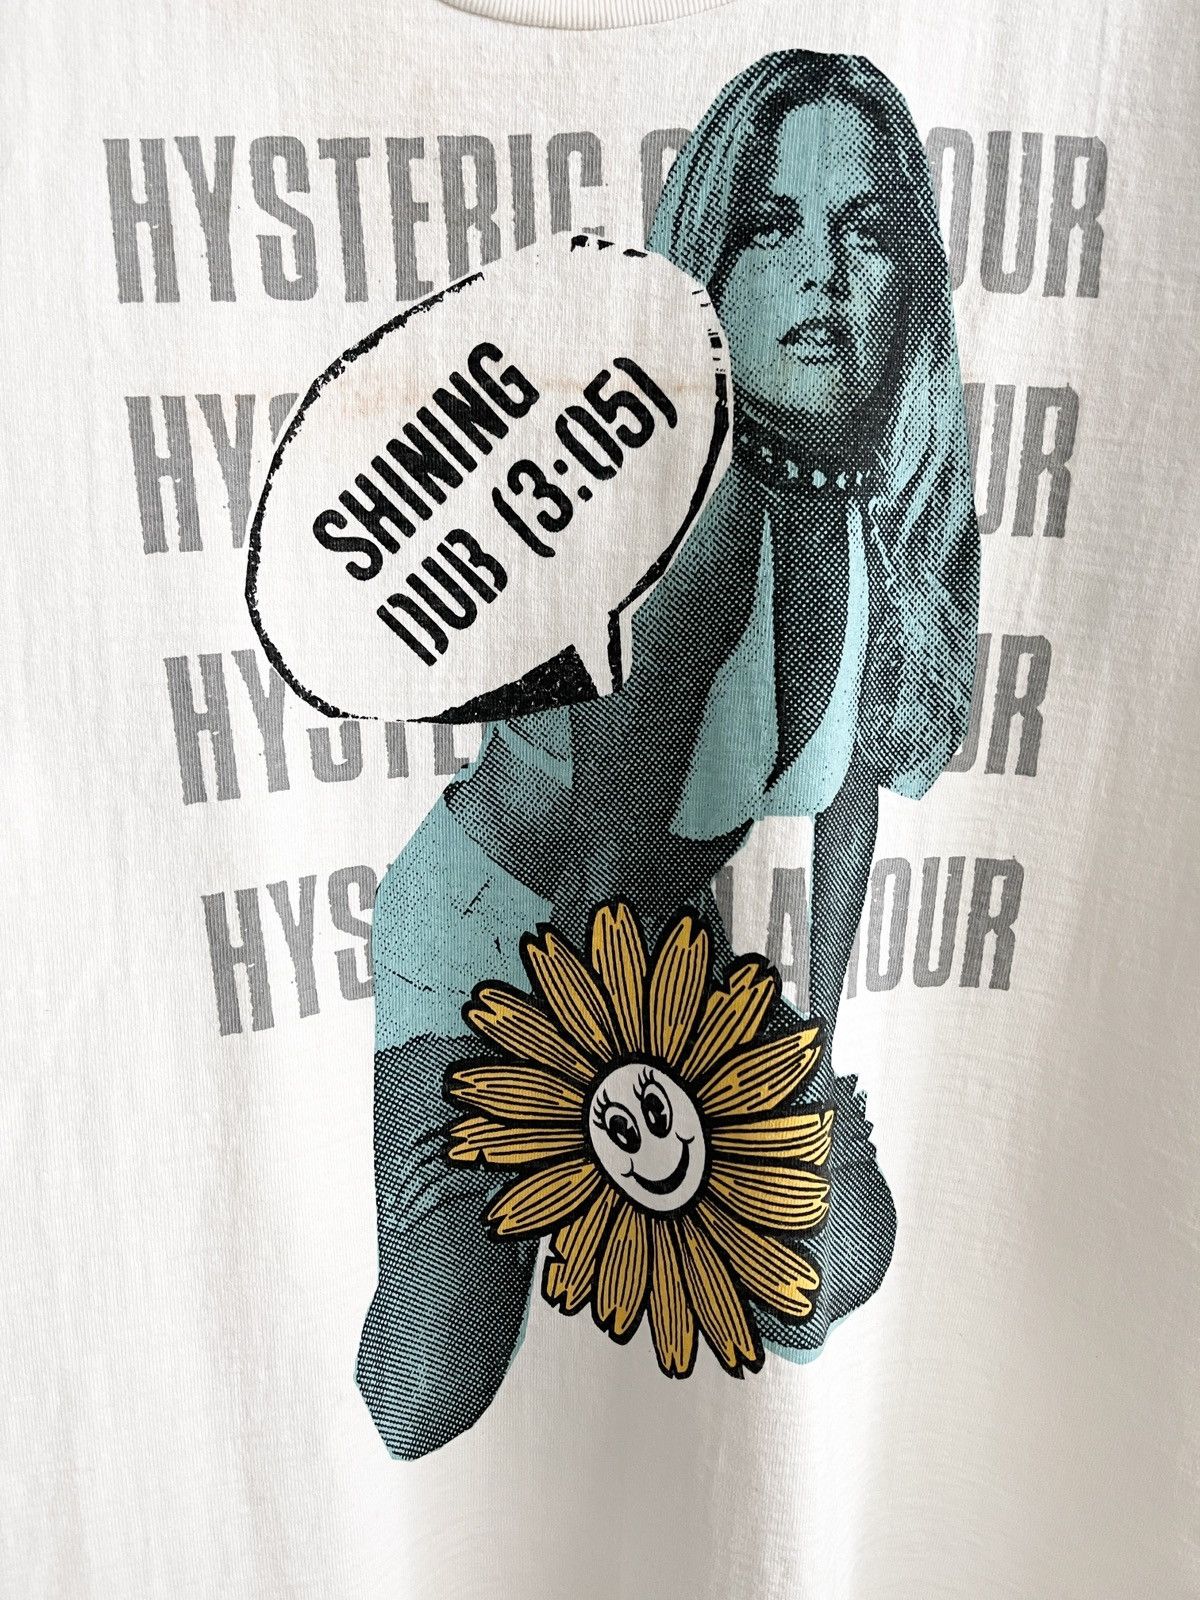 STEAL! 2000s Hysteric Glamour Hot Girl Shining Dub Tee - 4